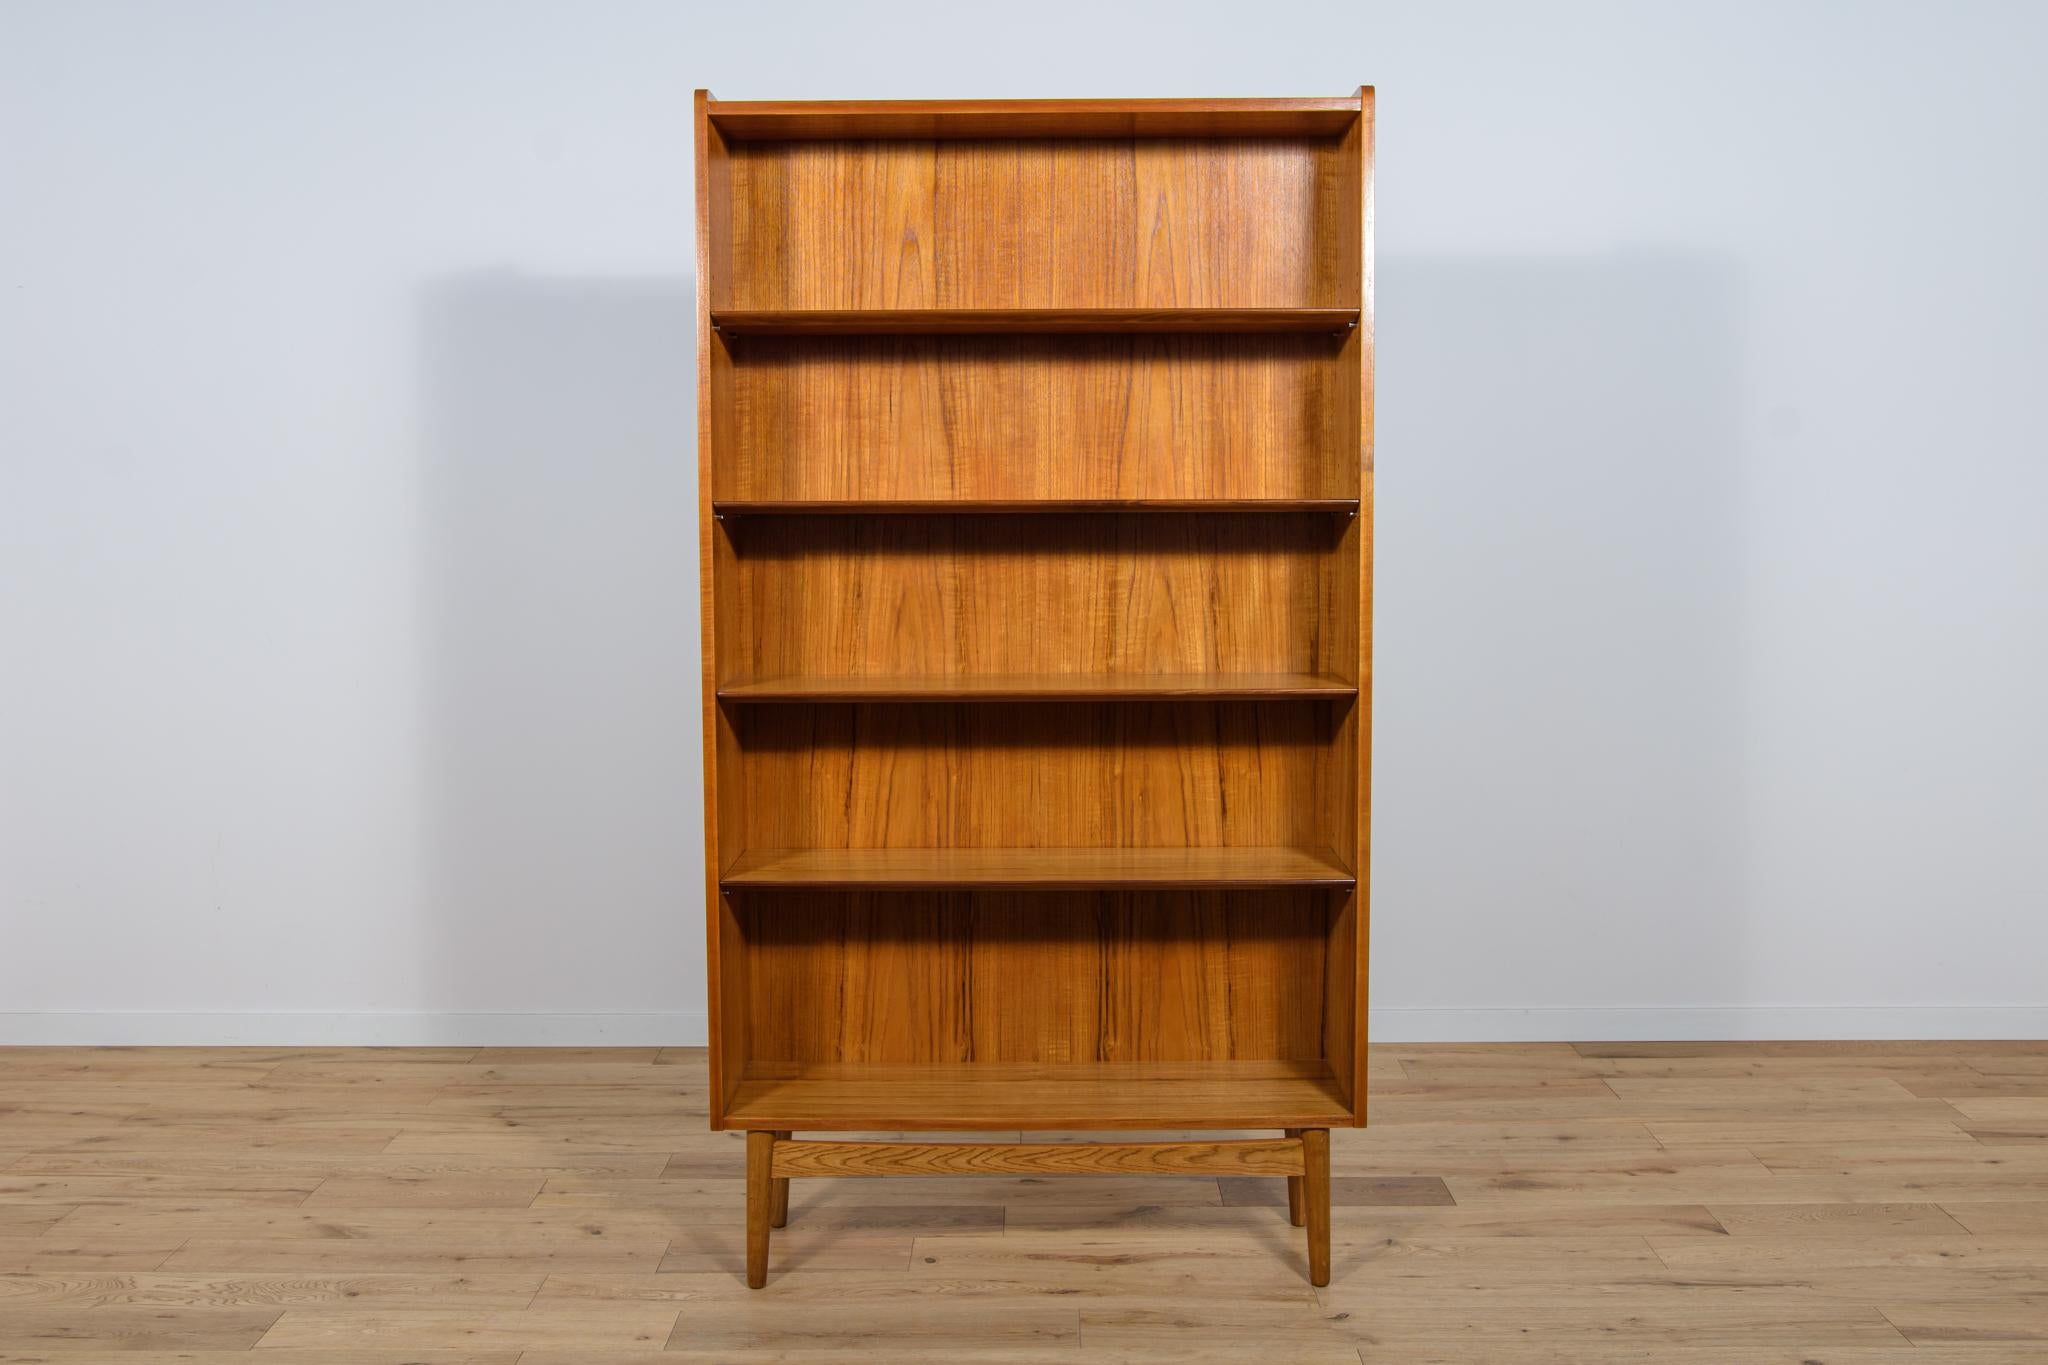 
Teak veneer bookcase designed by Johannes Sorth for Bornholm, Denmark in the 1960s. Bookcase with five shelves (adjustable height) tapering towards the top into a cone shape. The bookcase is mounted on legs, connected by a profiled strip. Furniture